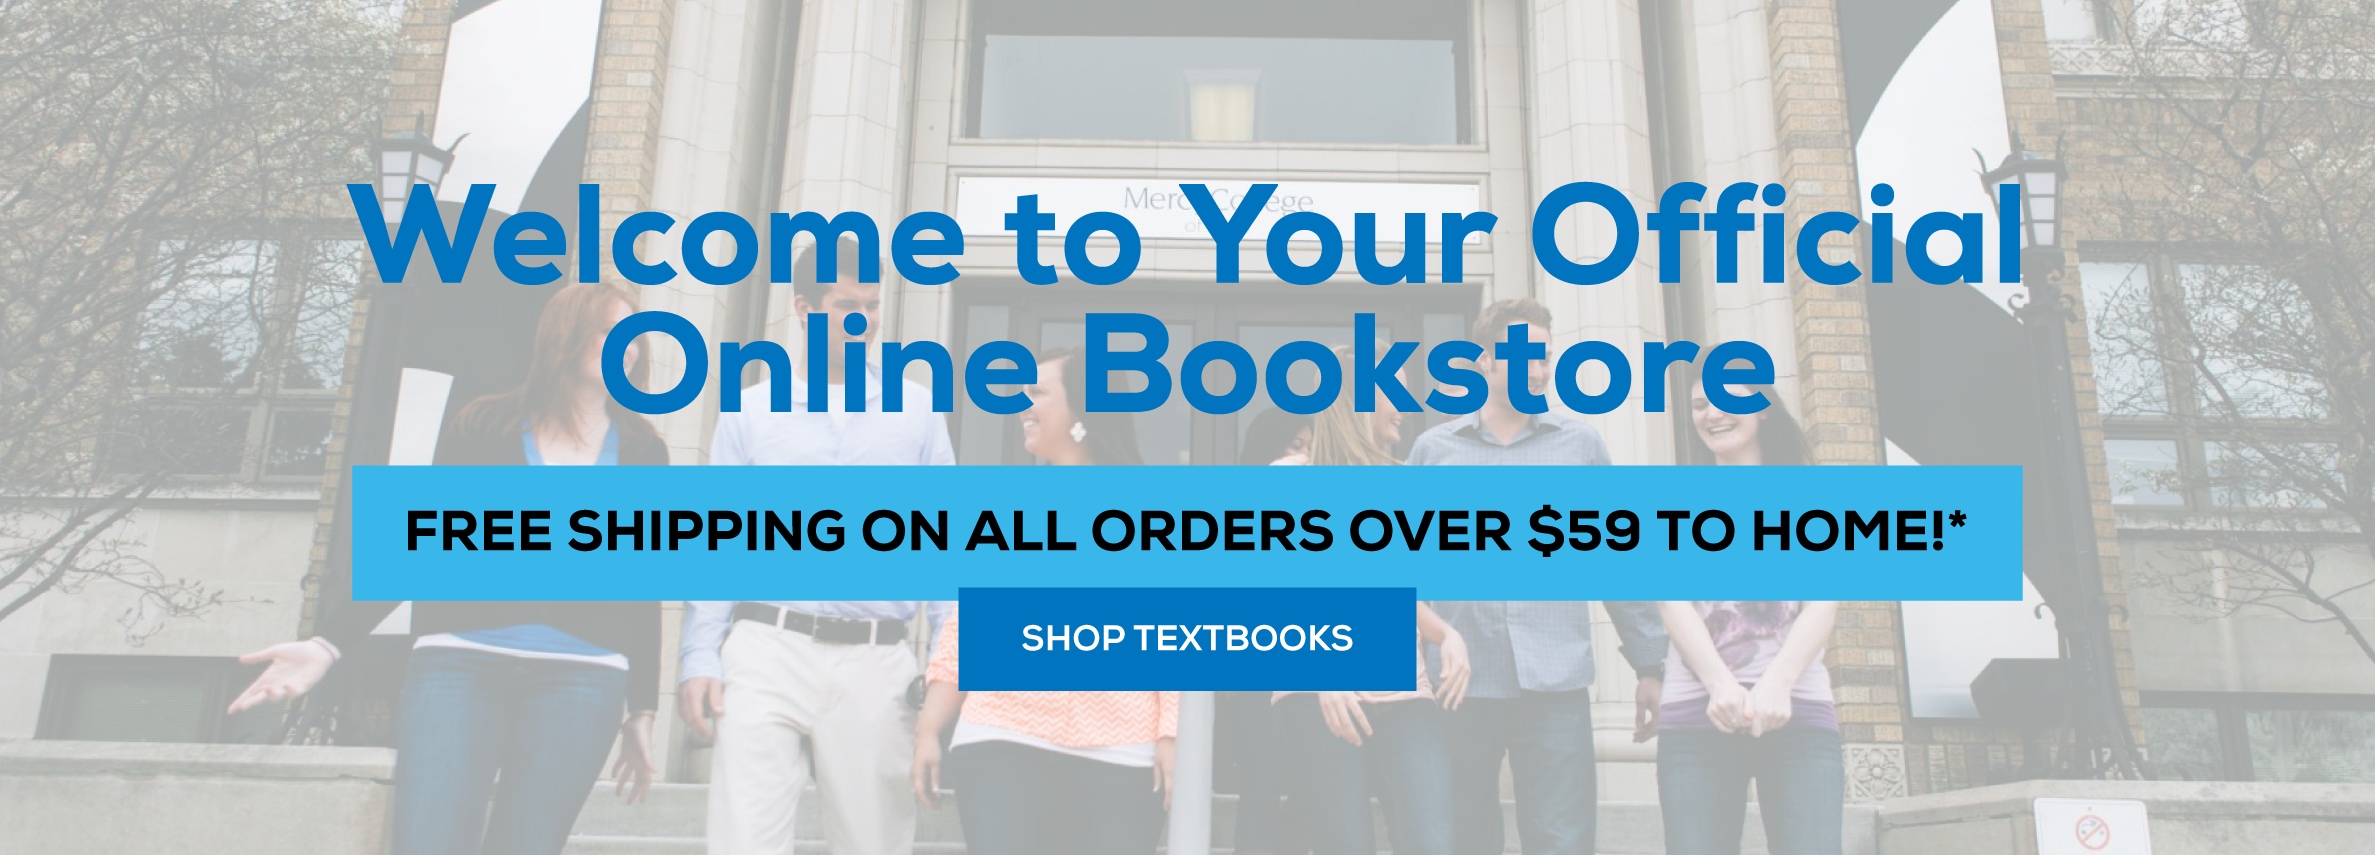 Welcome to Your New Online Bookstore